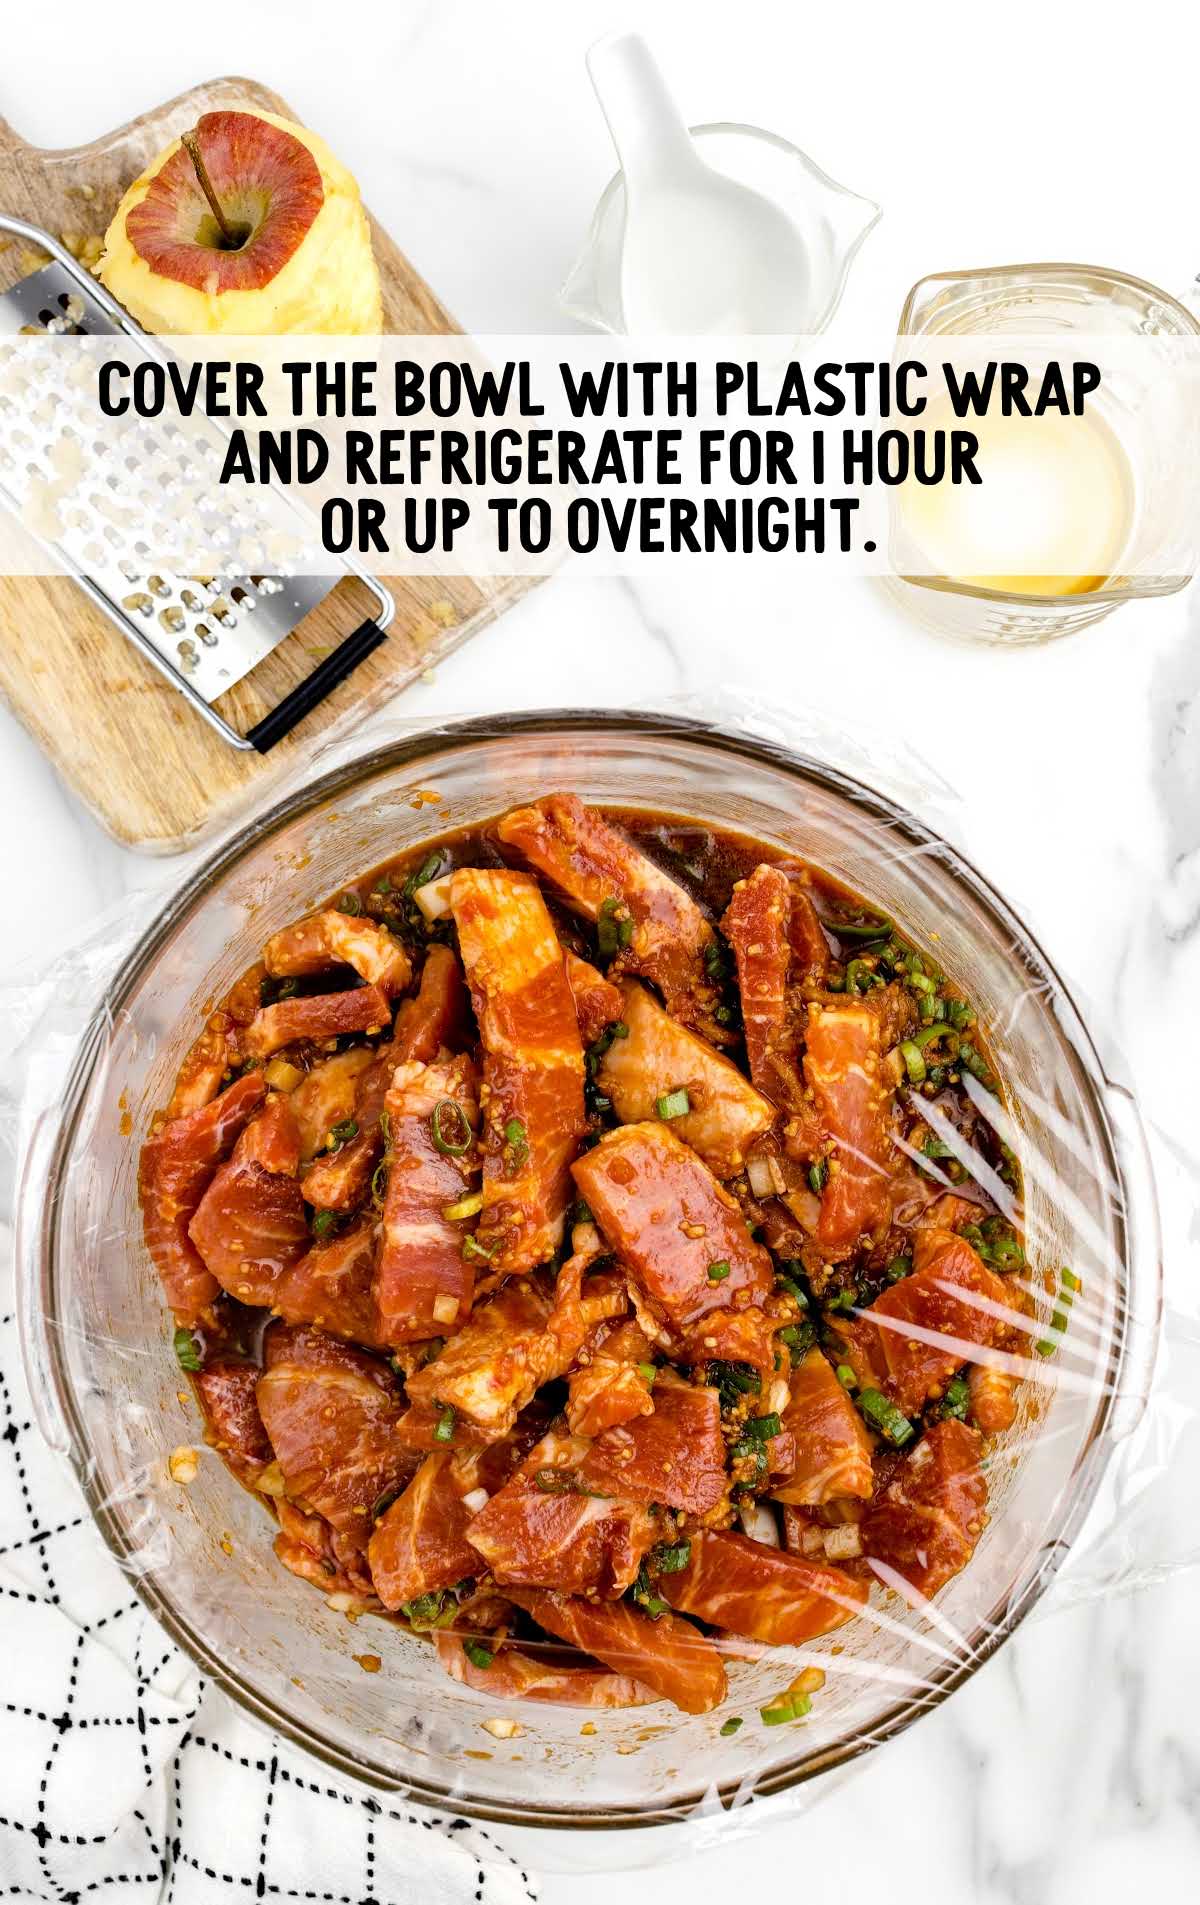 pork marinading in a bowl wrapped in plastic